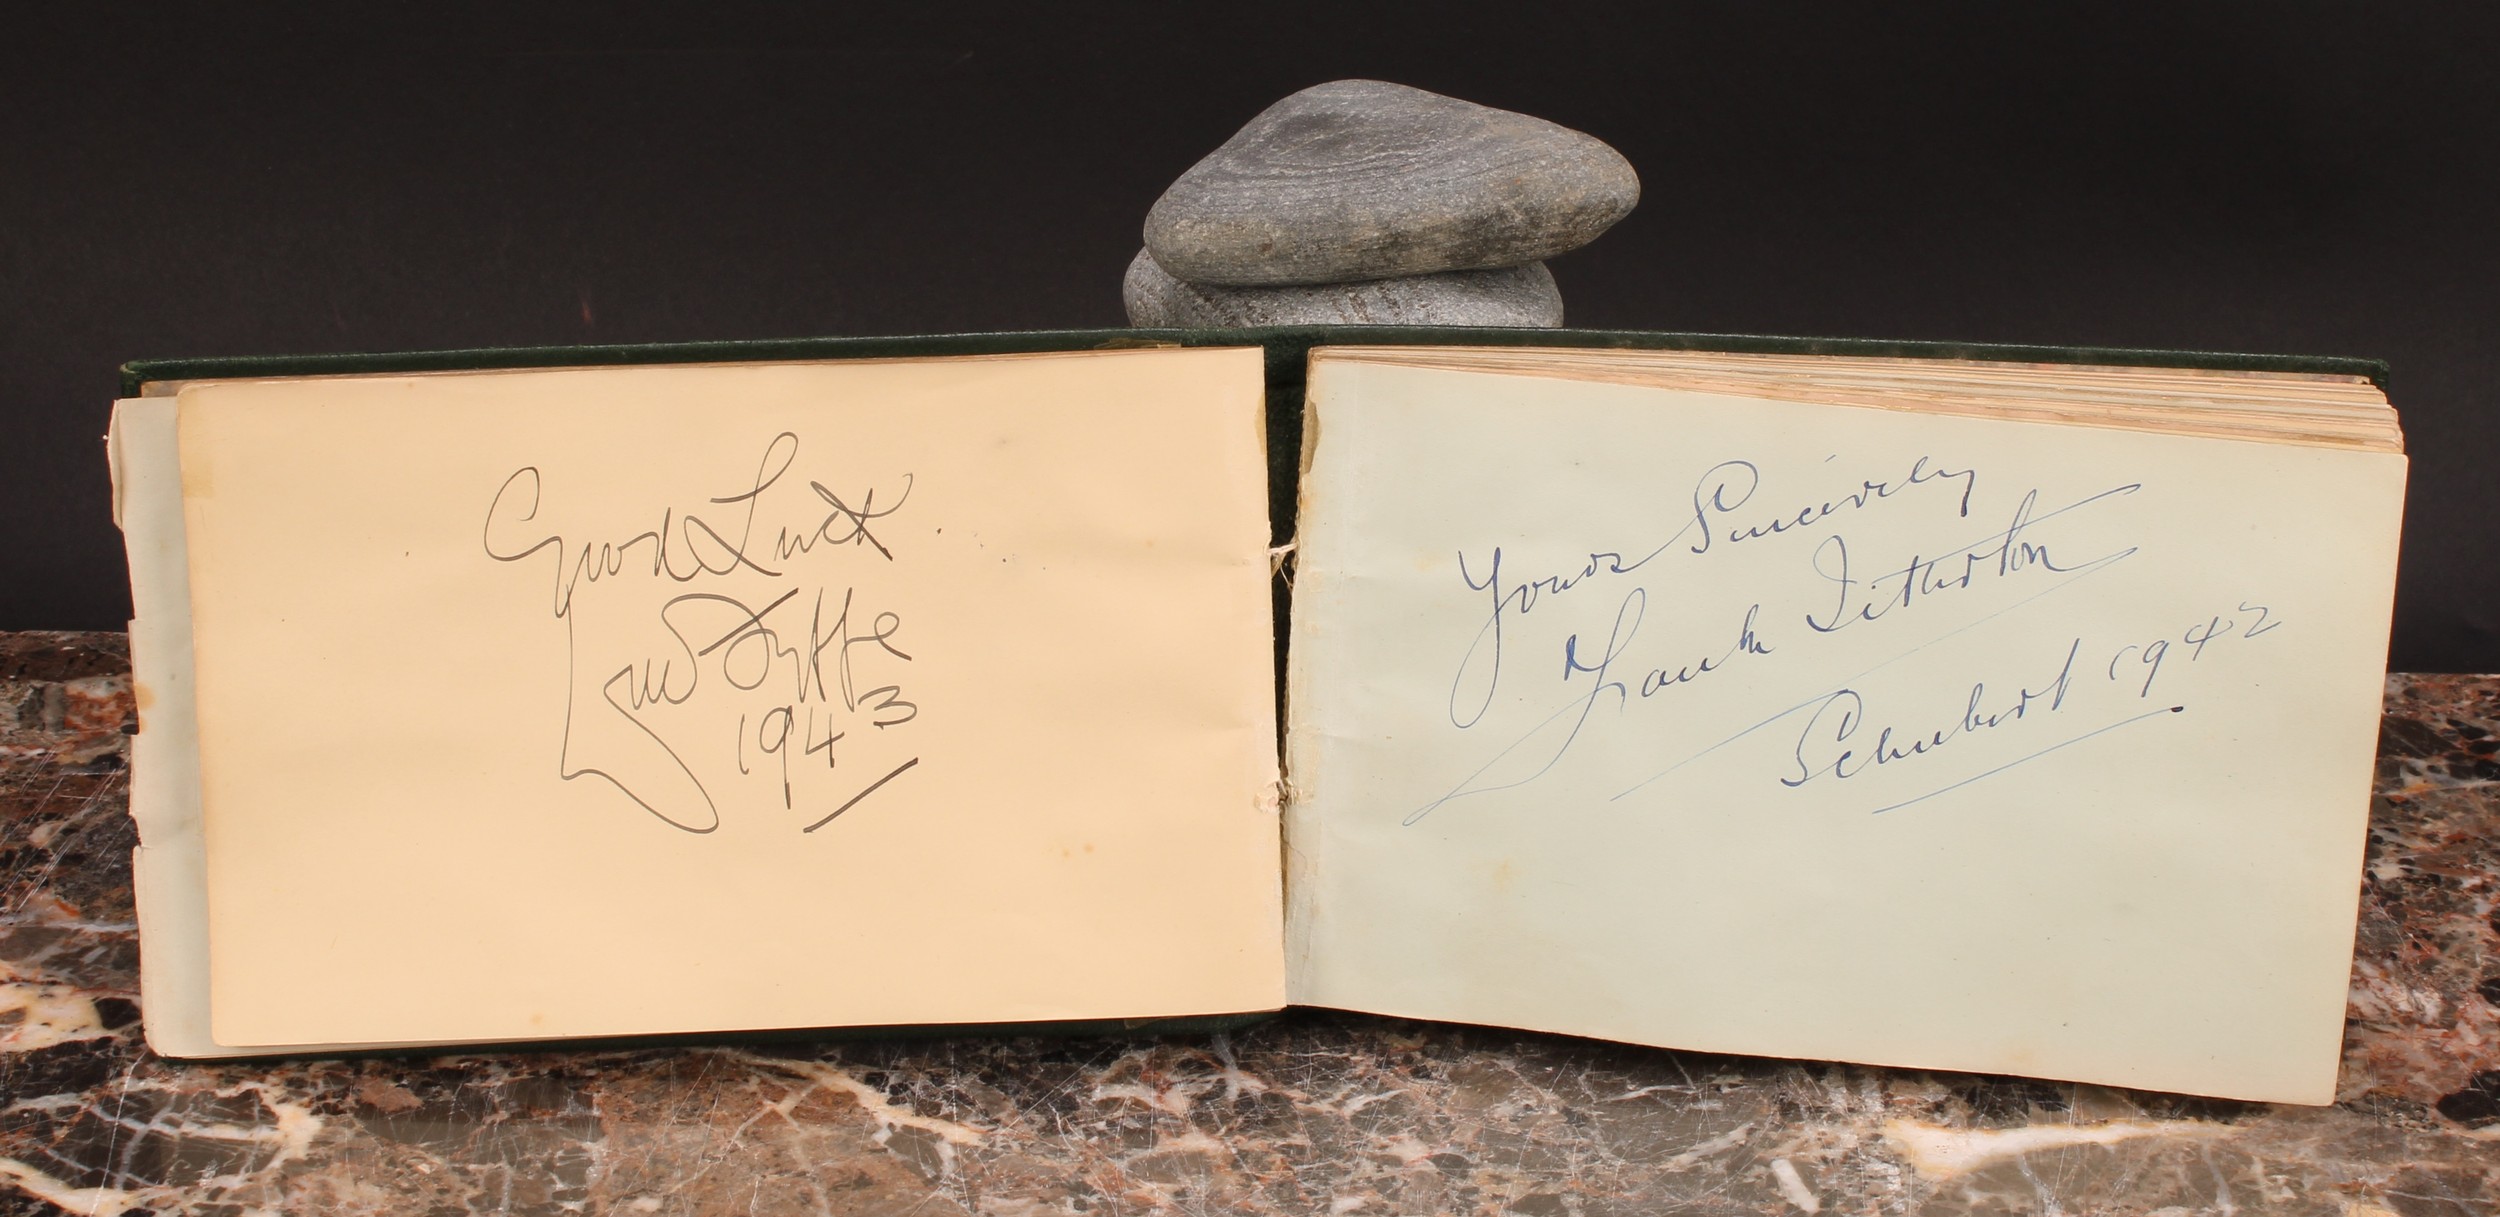 Autographs - Sport and Showbusiness - an early to mid-20th century autograph album, Charlie Chester;